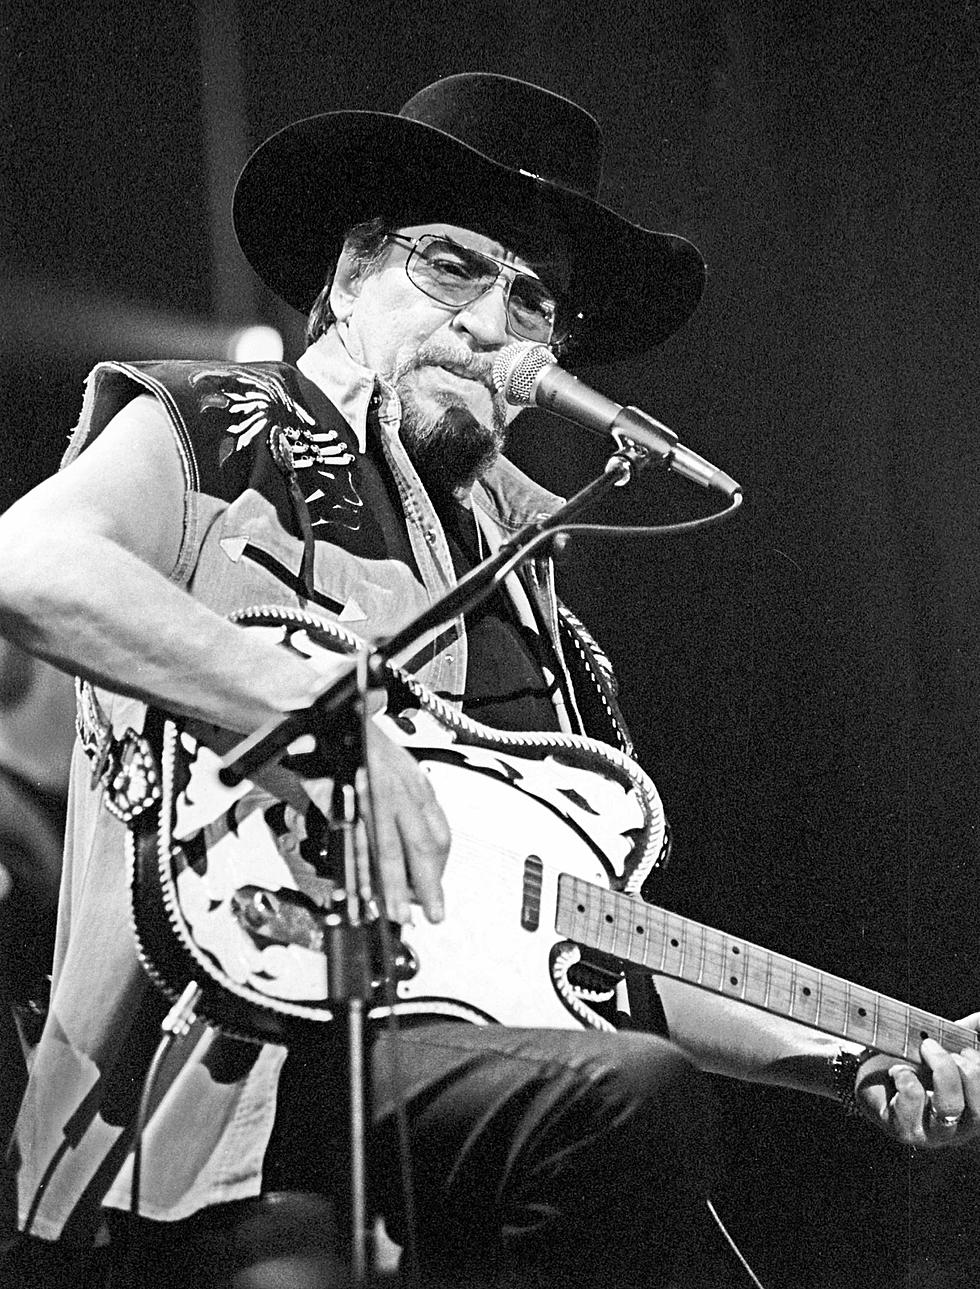 A Tribute to Waylon Jennings at Lubbock’s Cactus Theater on June 17th